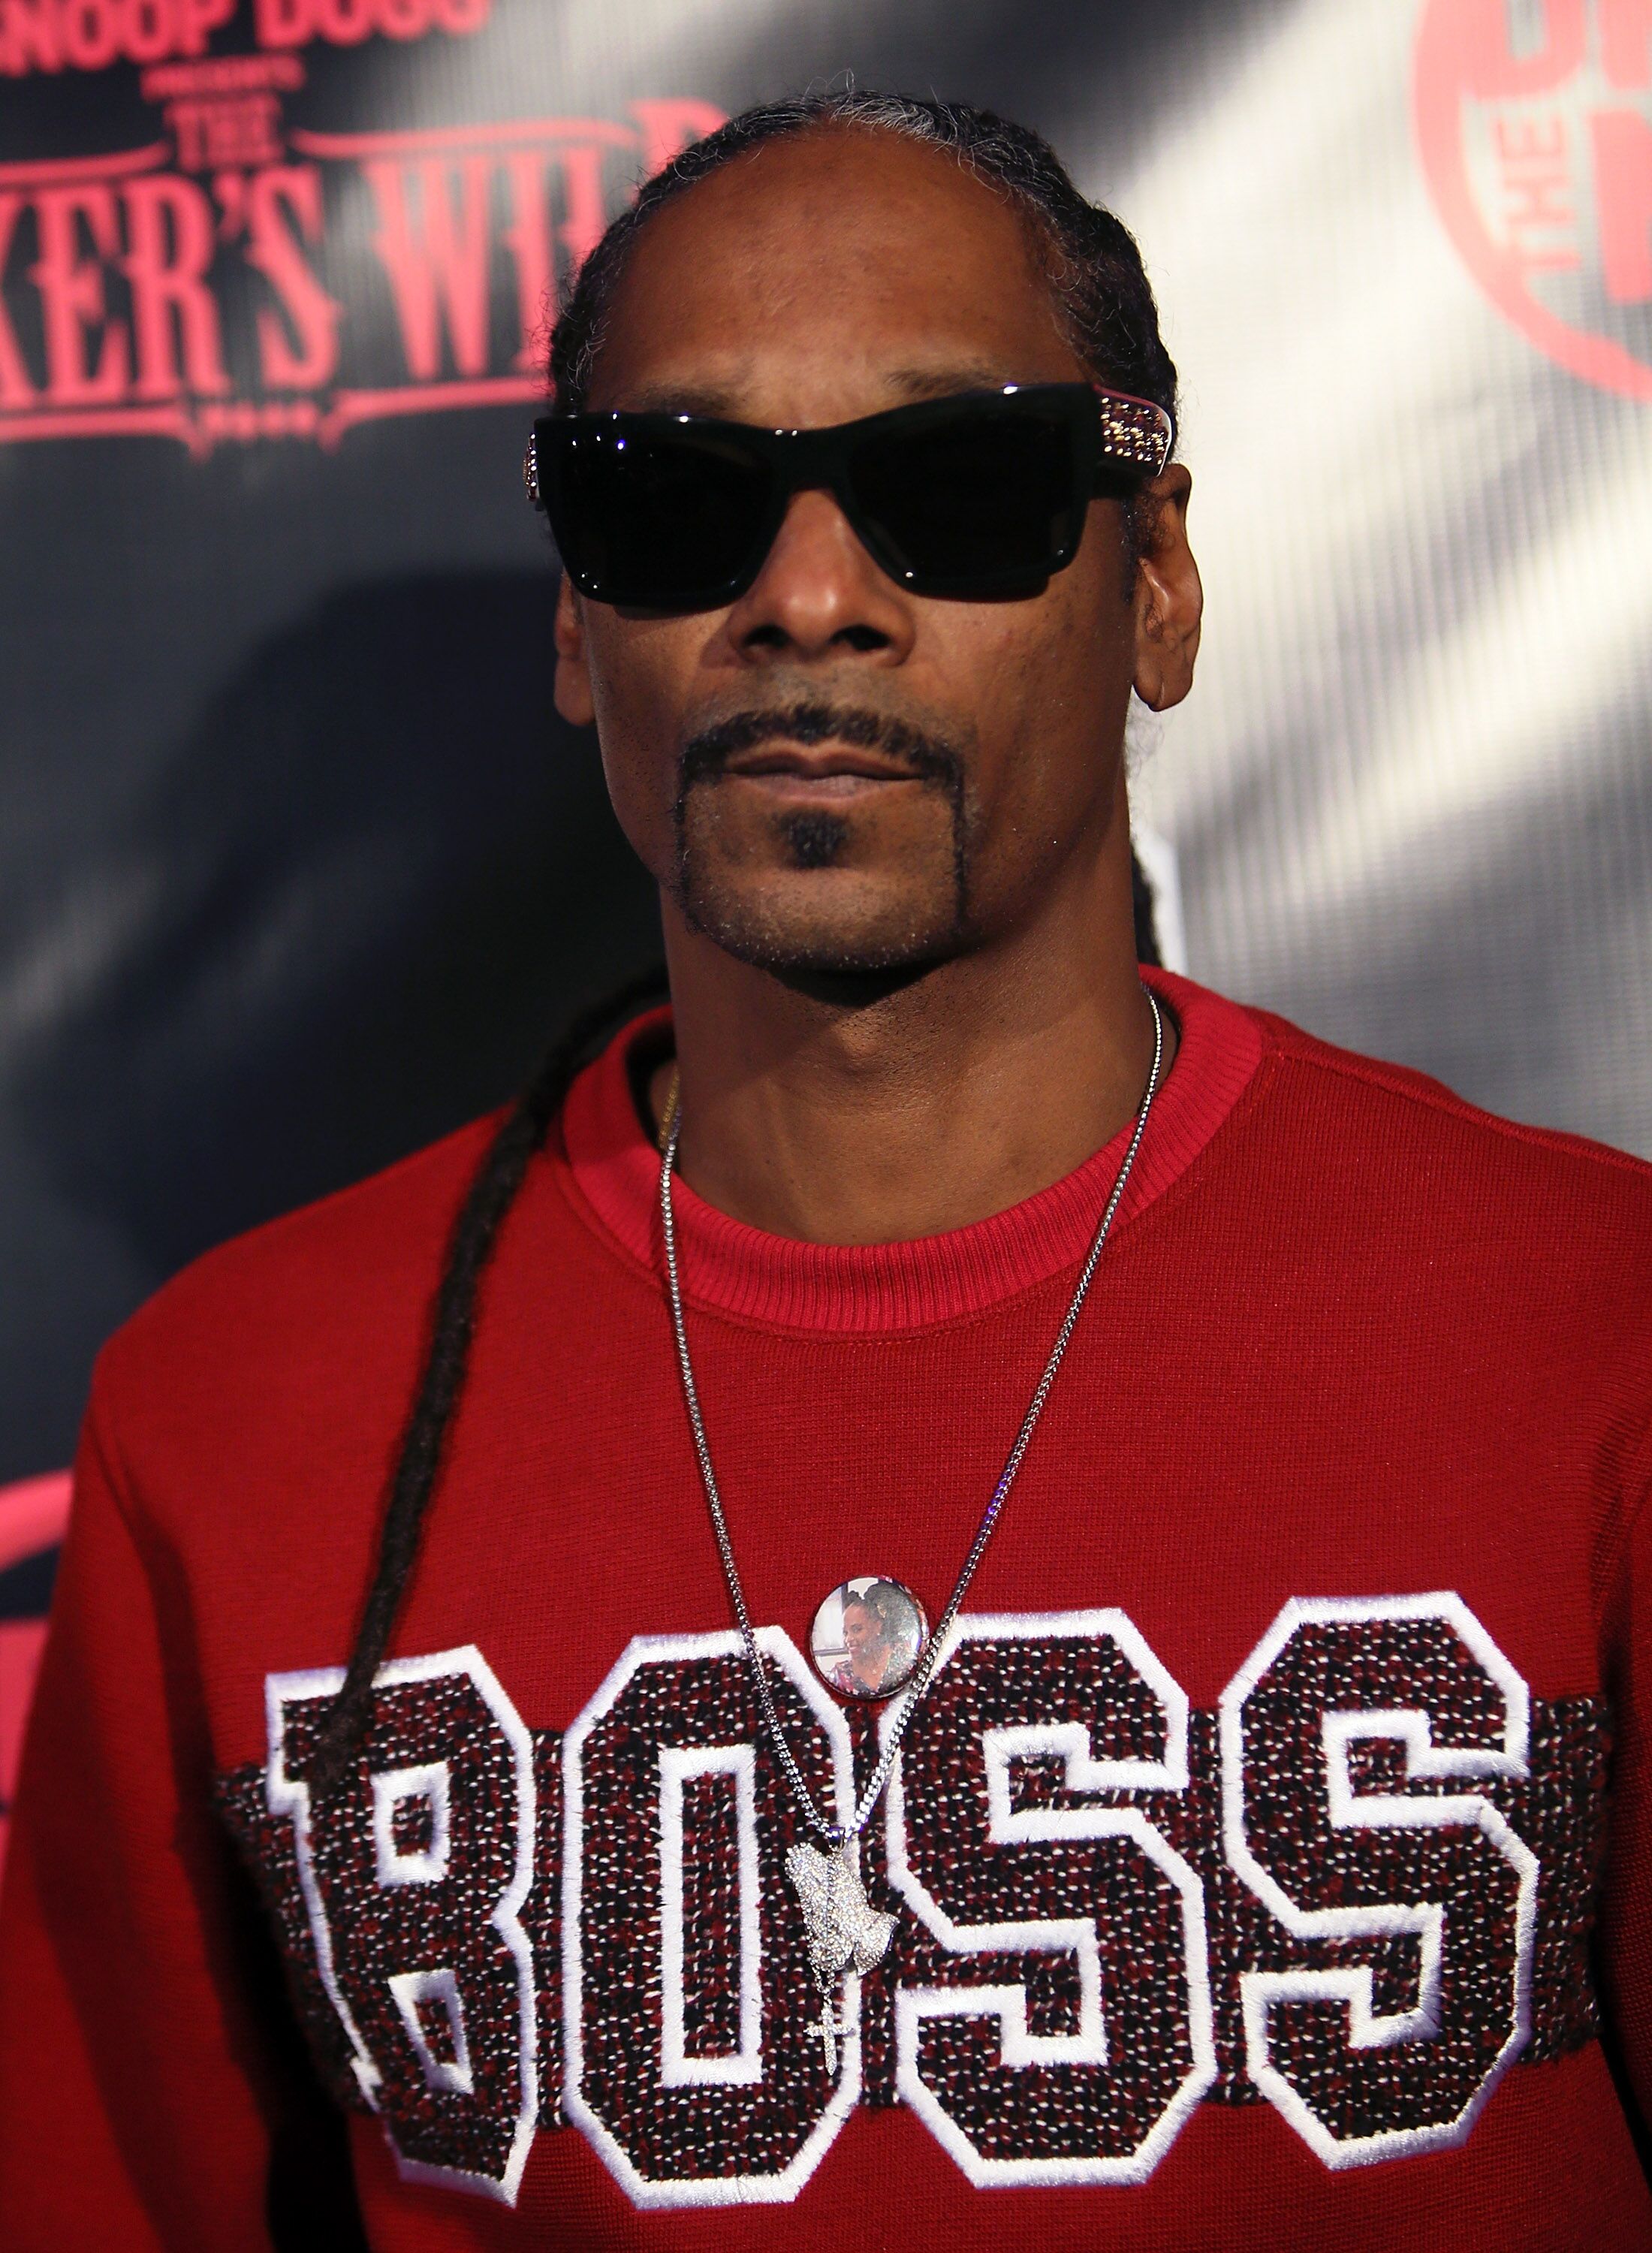 Snoop Dogg at the premiere for TBS's "Drop The Mic" and "The Joker's Wild" on October 11, 2017. | Photo: Getty Images